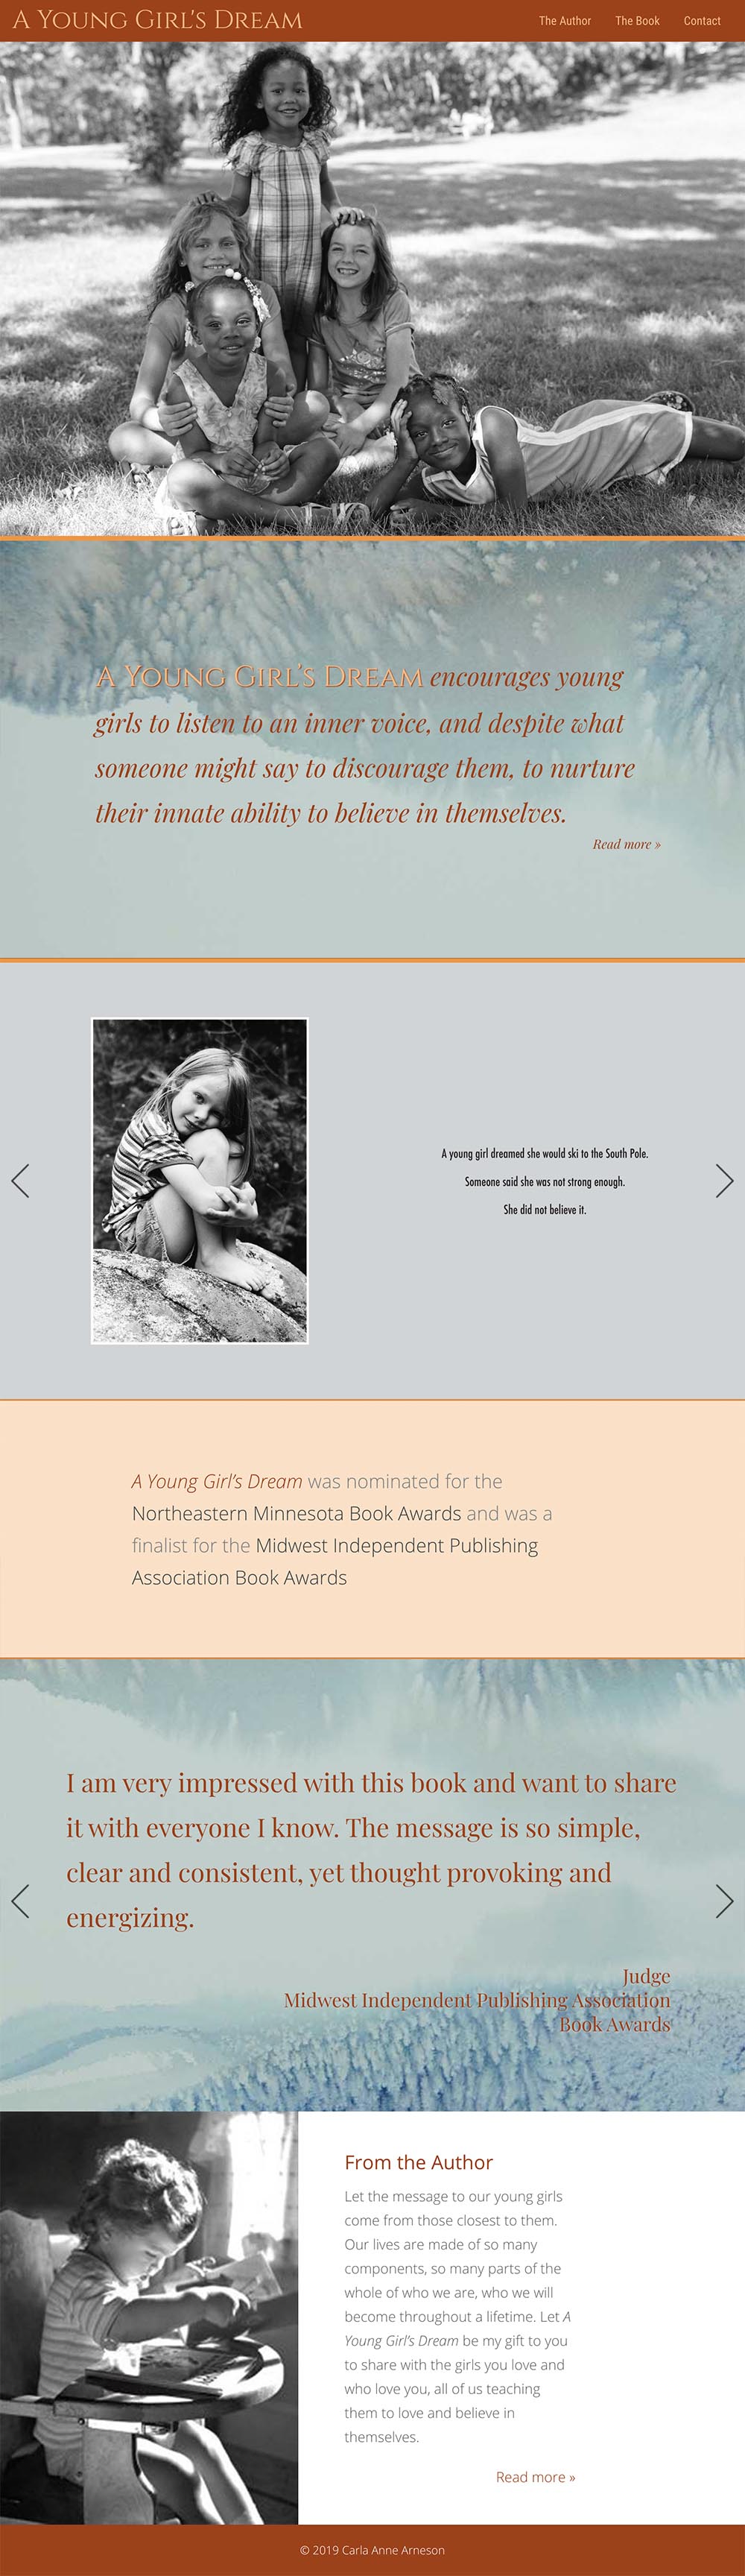 website design for authors - This website was designed to promote and sell a new book of photographs and stories to encourage the aspirations and dreams of young girls. 																																																				 - long-scrolling page with rich visual sections to help a user find what they are looking for.